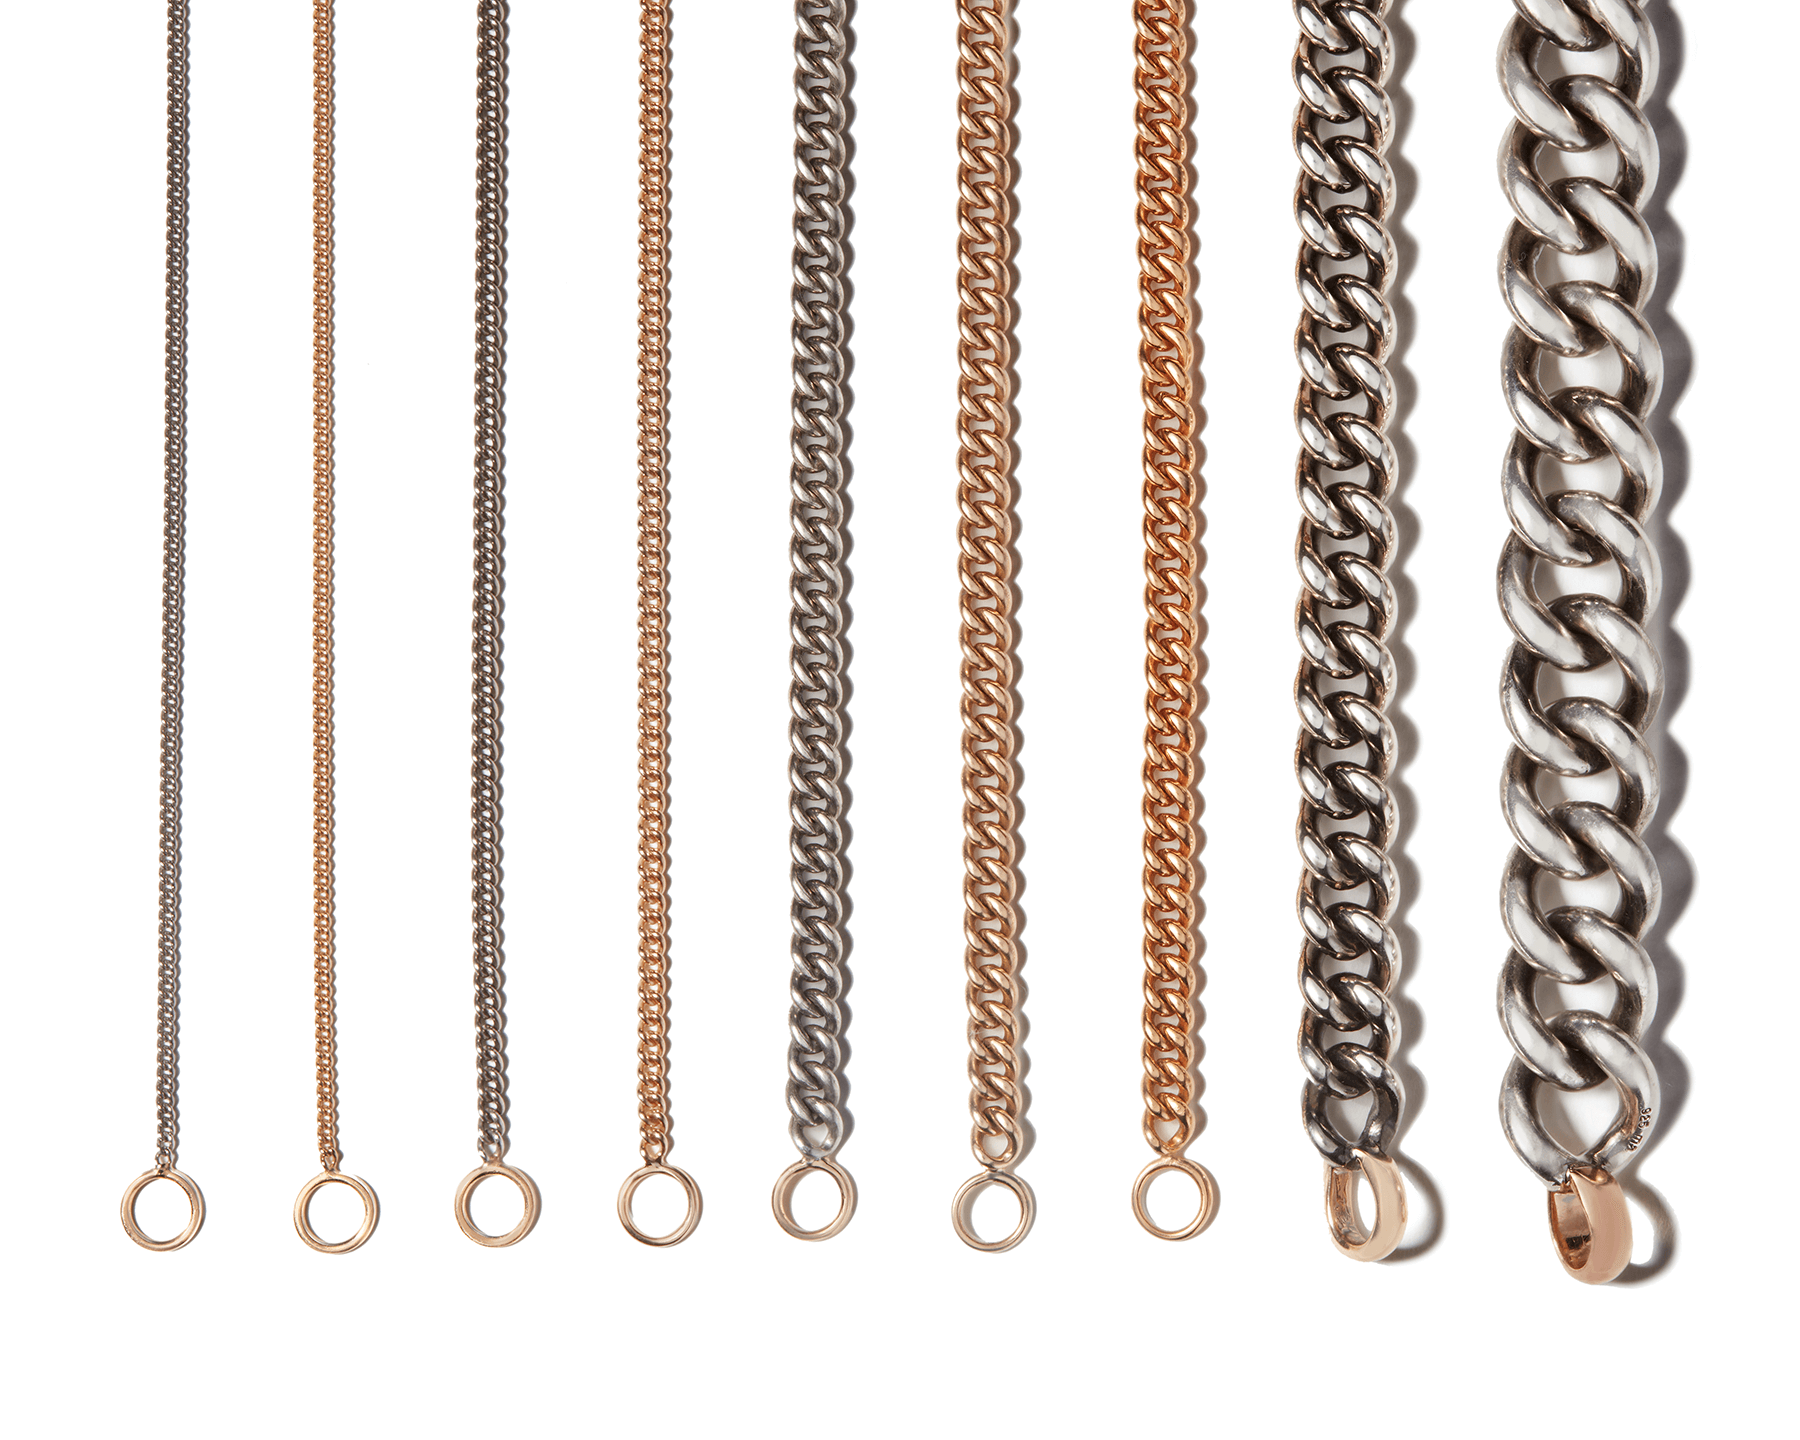 Line up of nine different curb chain bracelet thicknesses against white backdrop